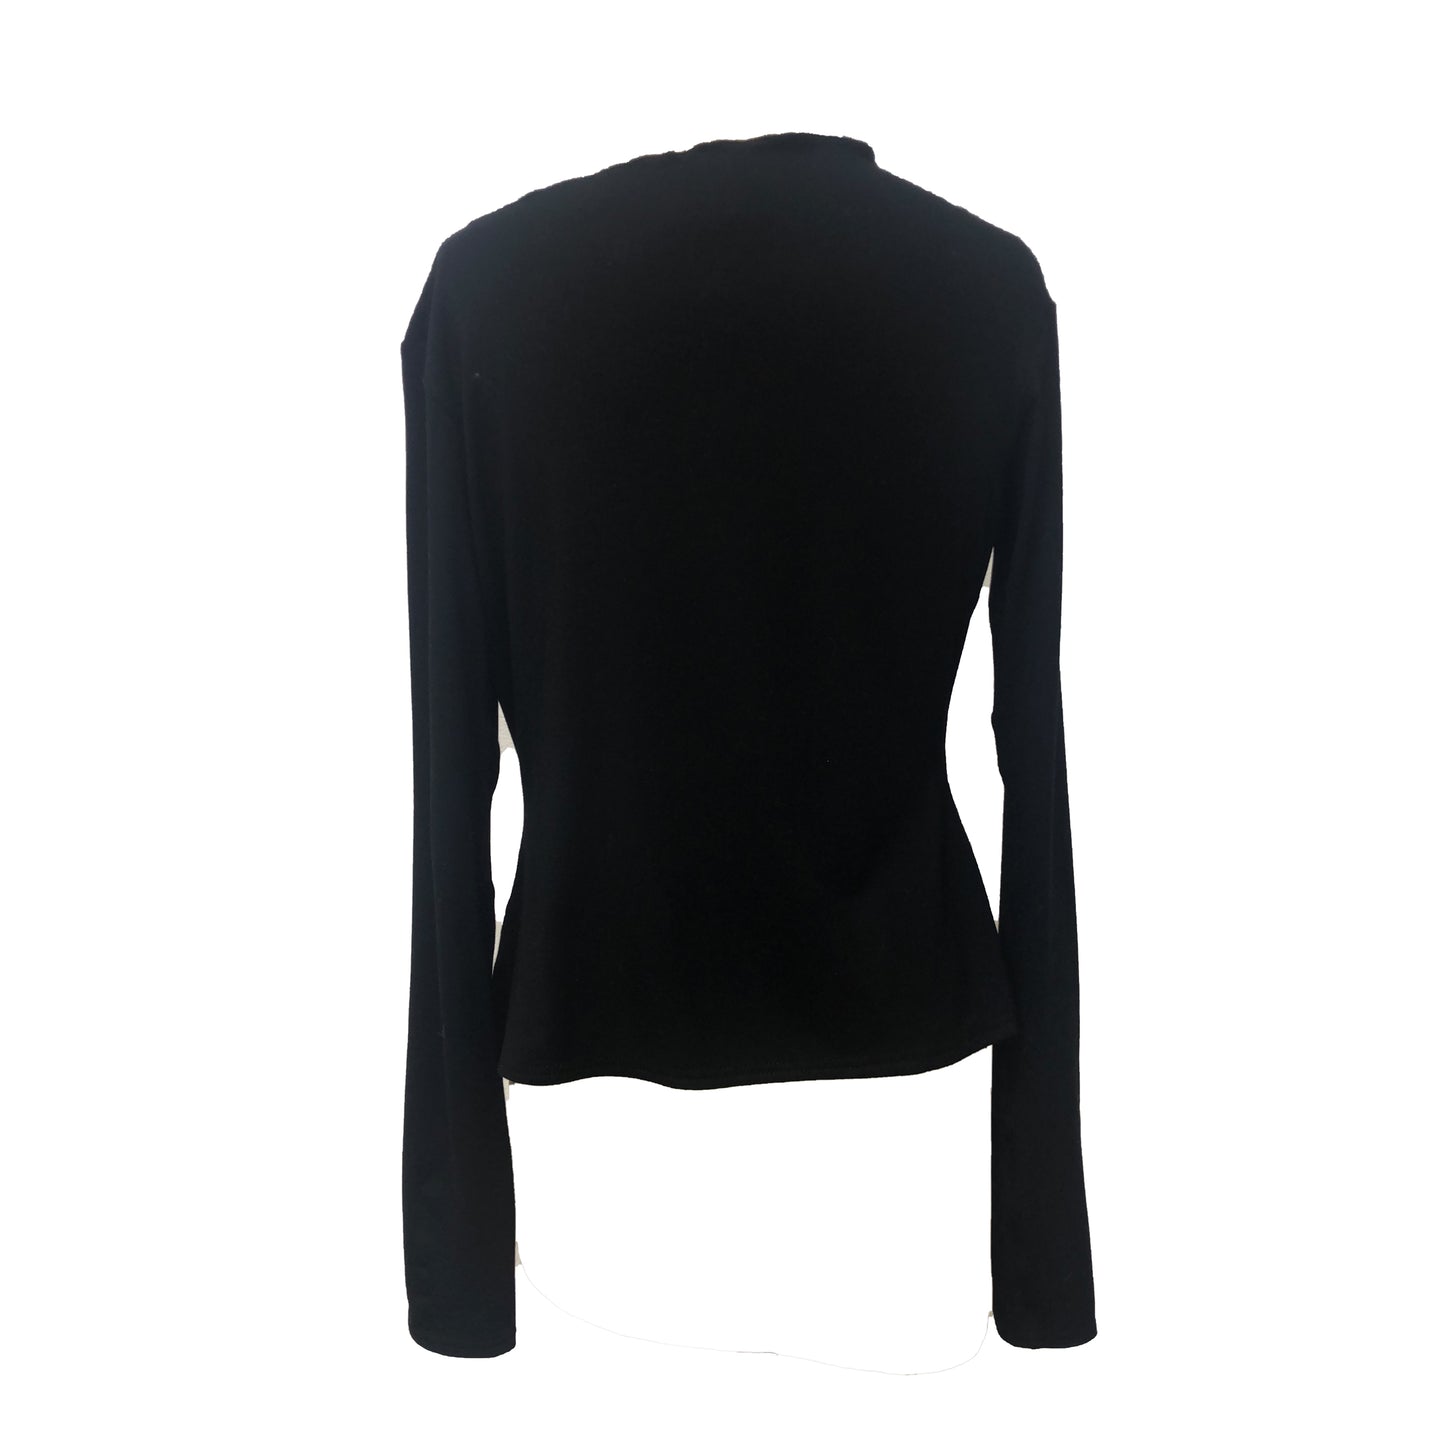 Back of bamboo asymmetrically draped long sleeve top in black